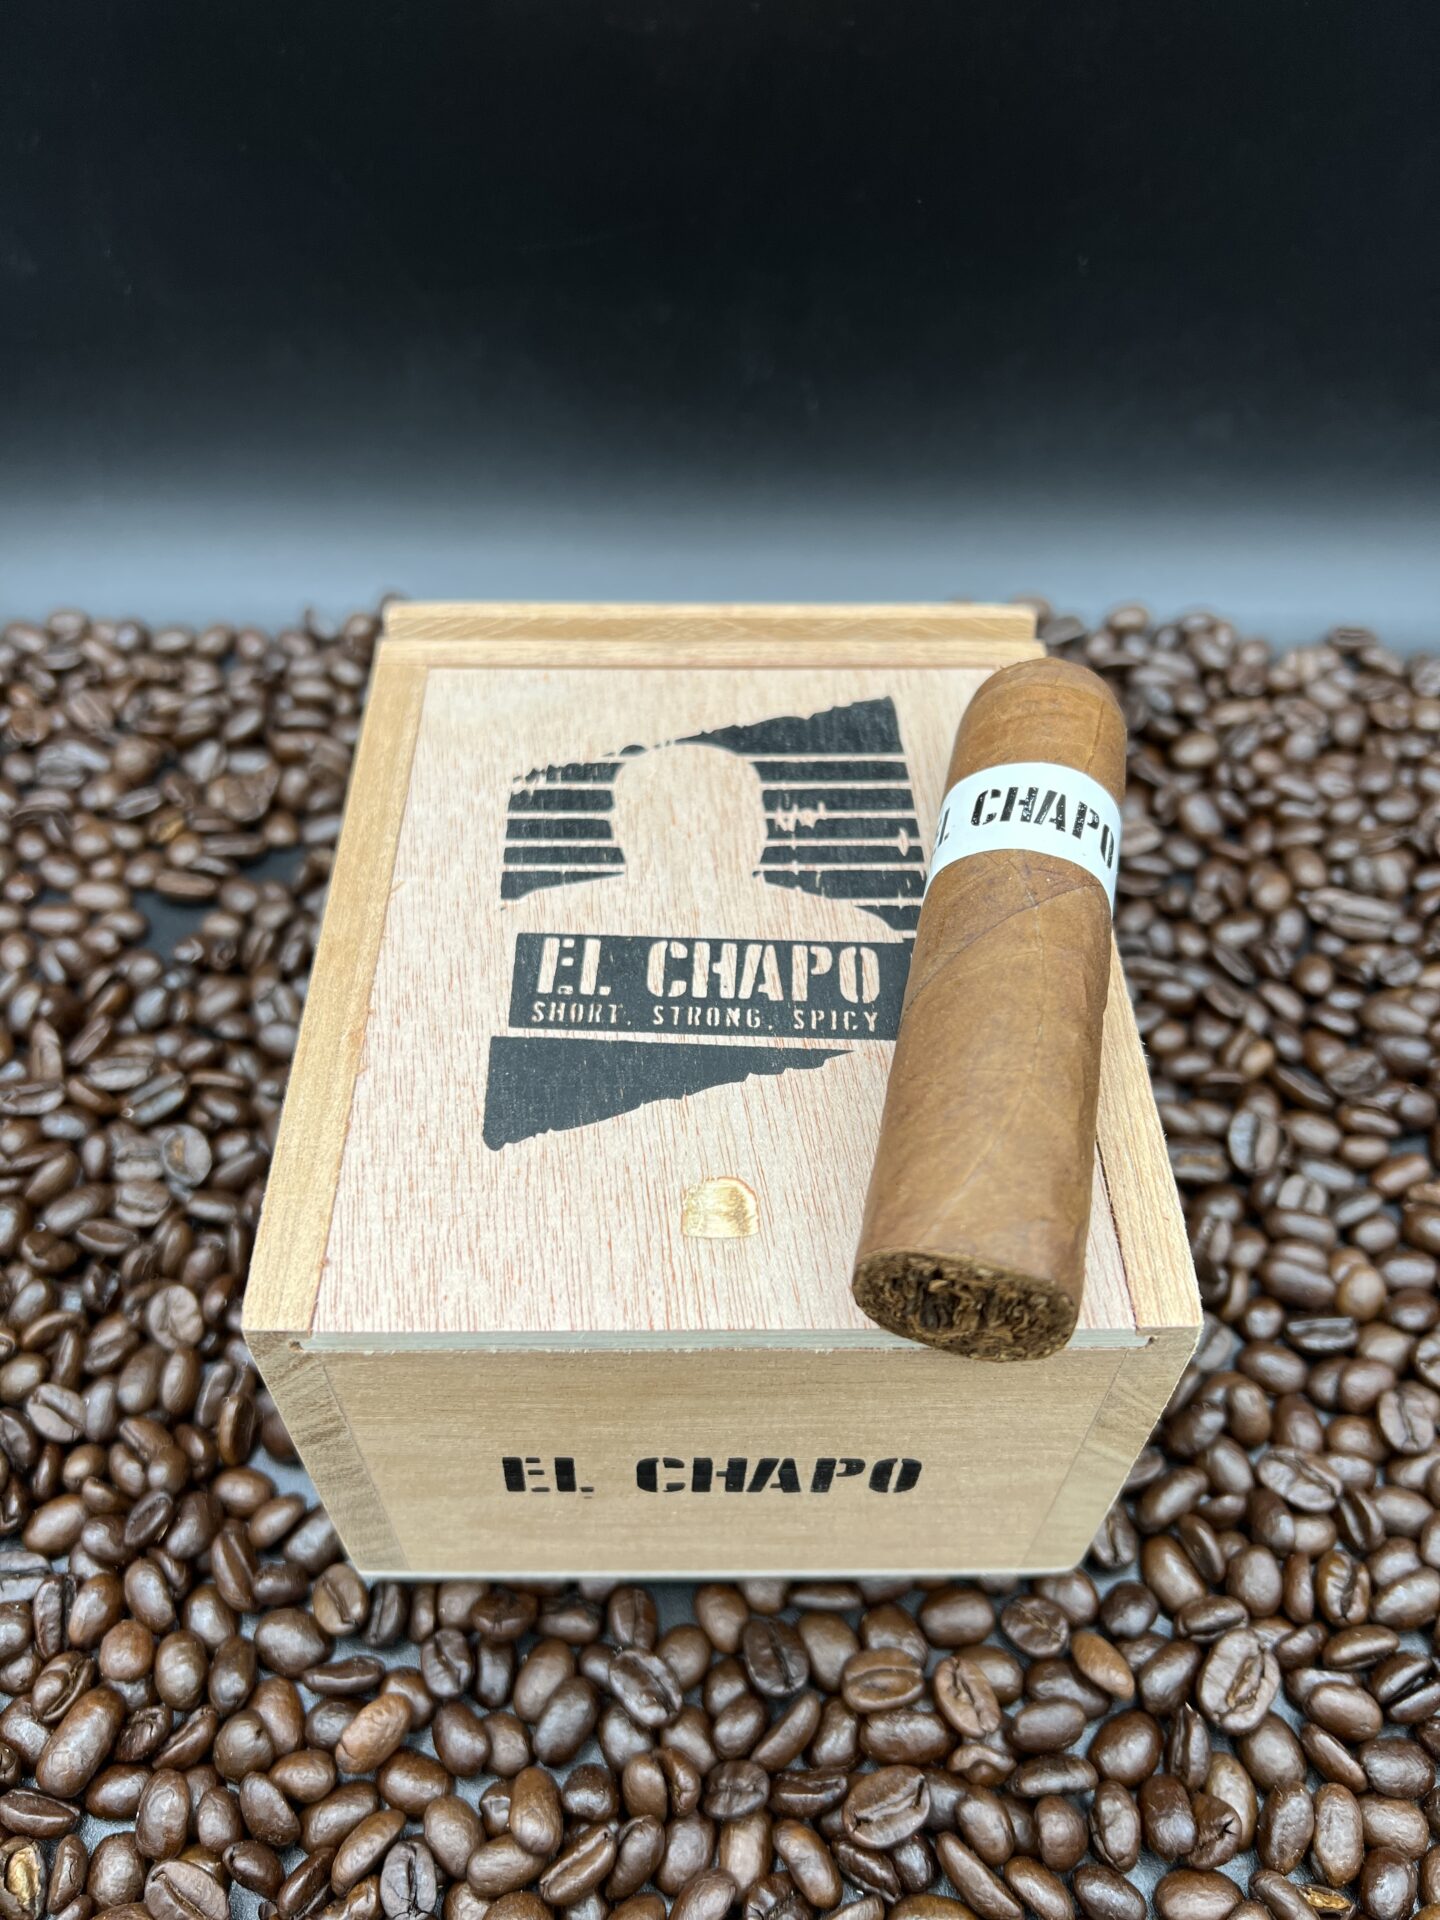 Jeremy Jack - El Chapo cigars supplied by Sir Louis Cigars